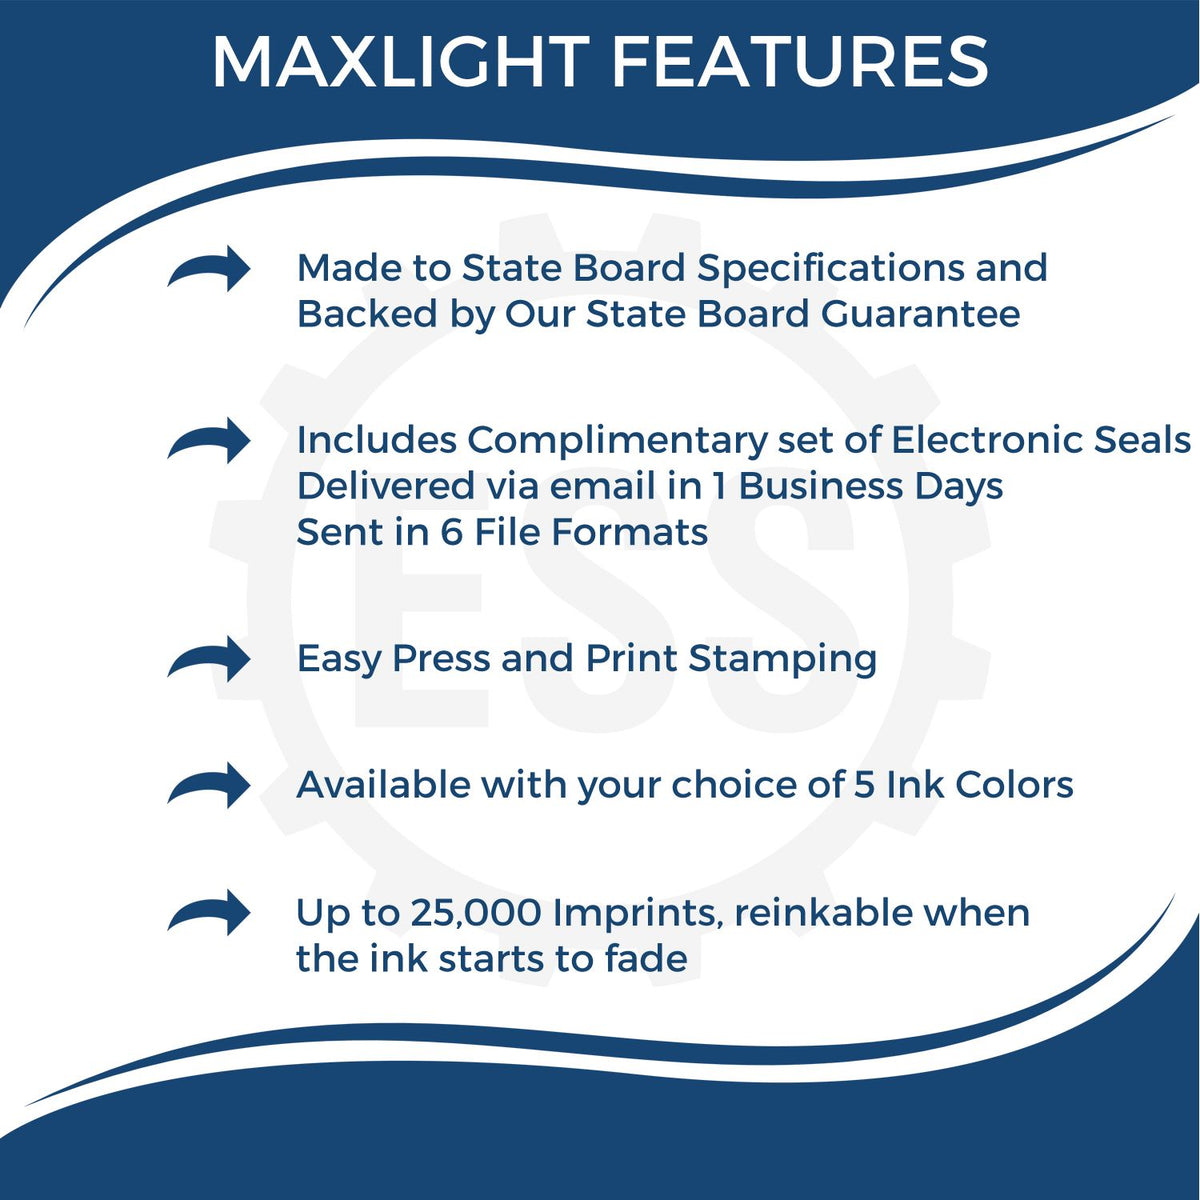 A picture of an infographic highlighting the selling points for the Premium MaxLight Pre-Inked Vermont Geology Stamp